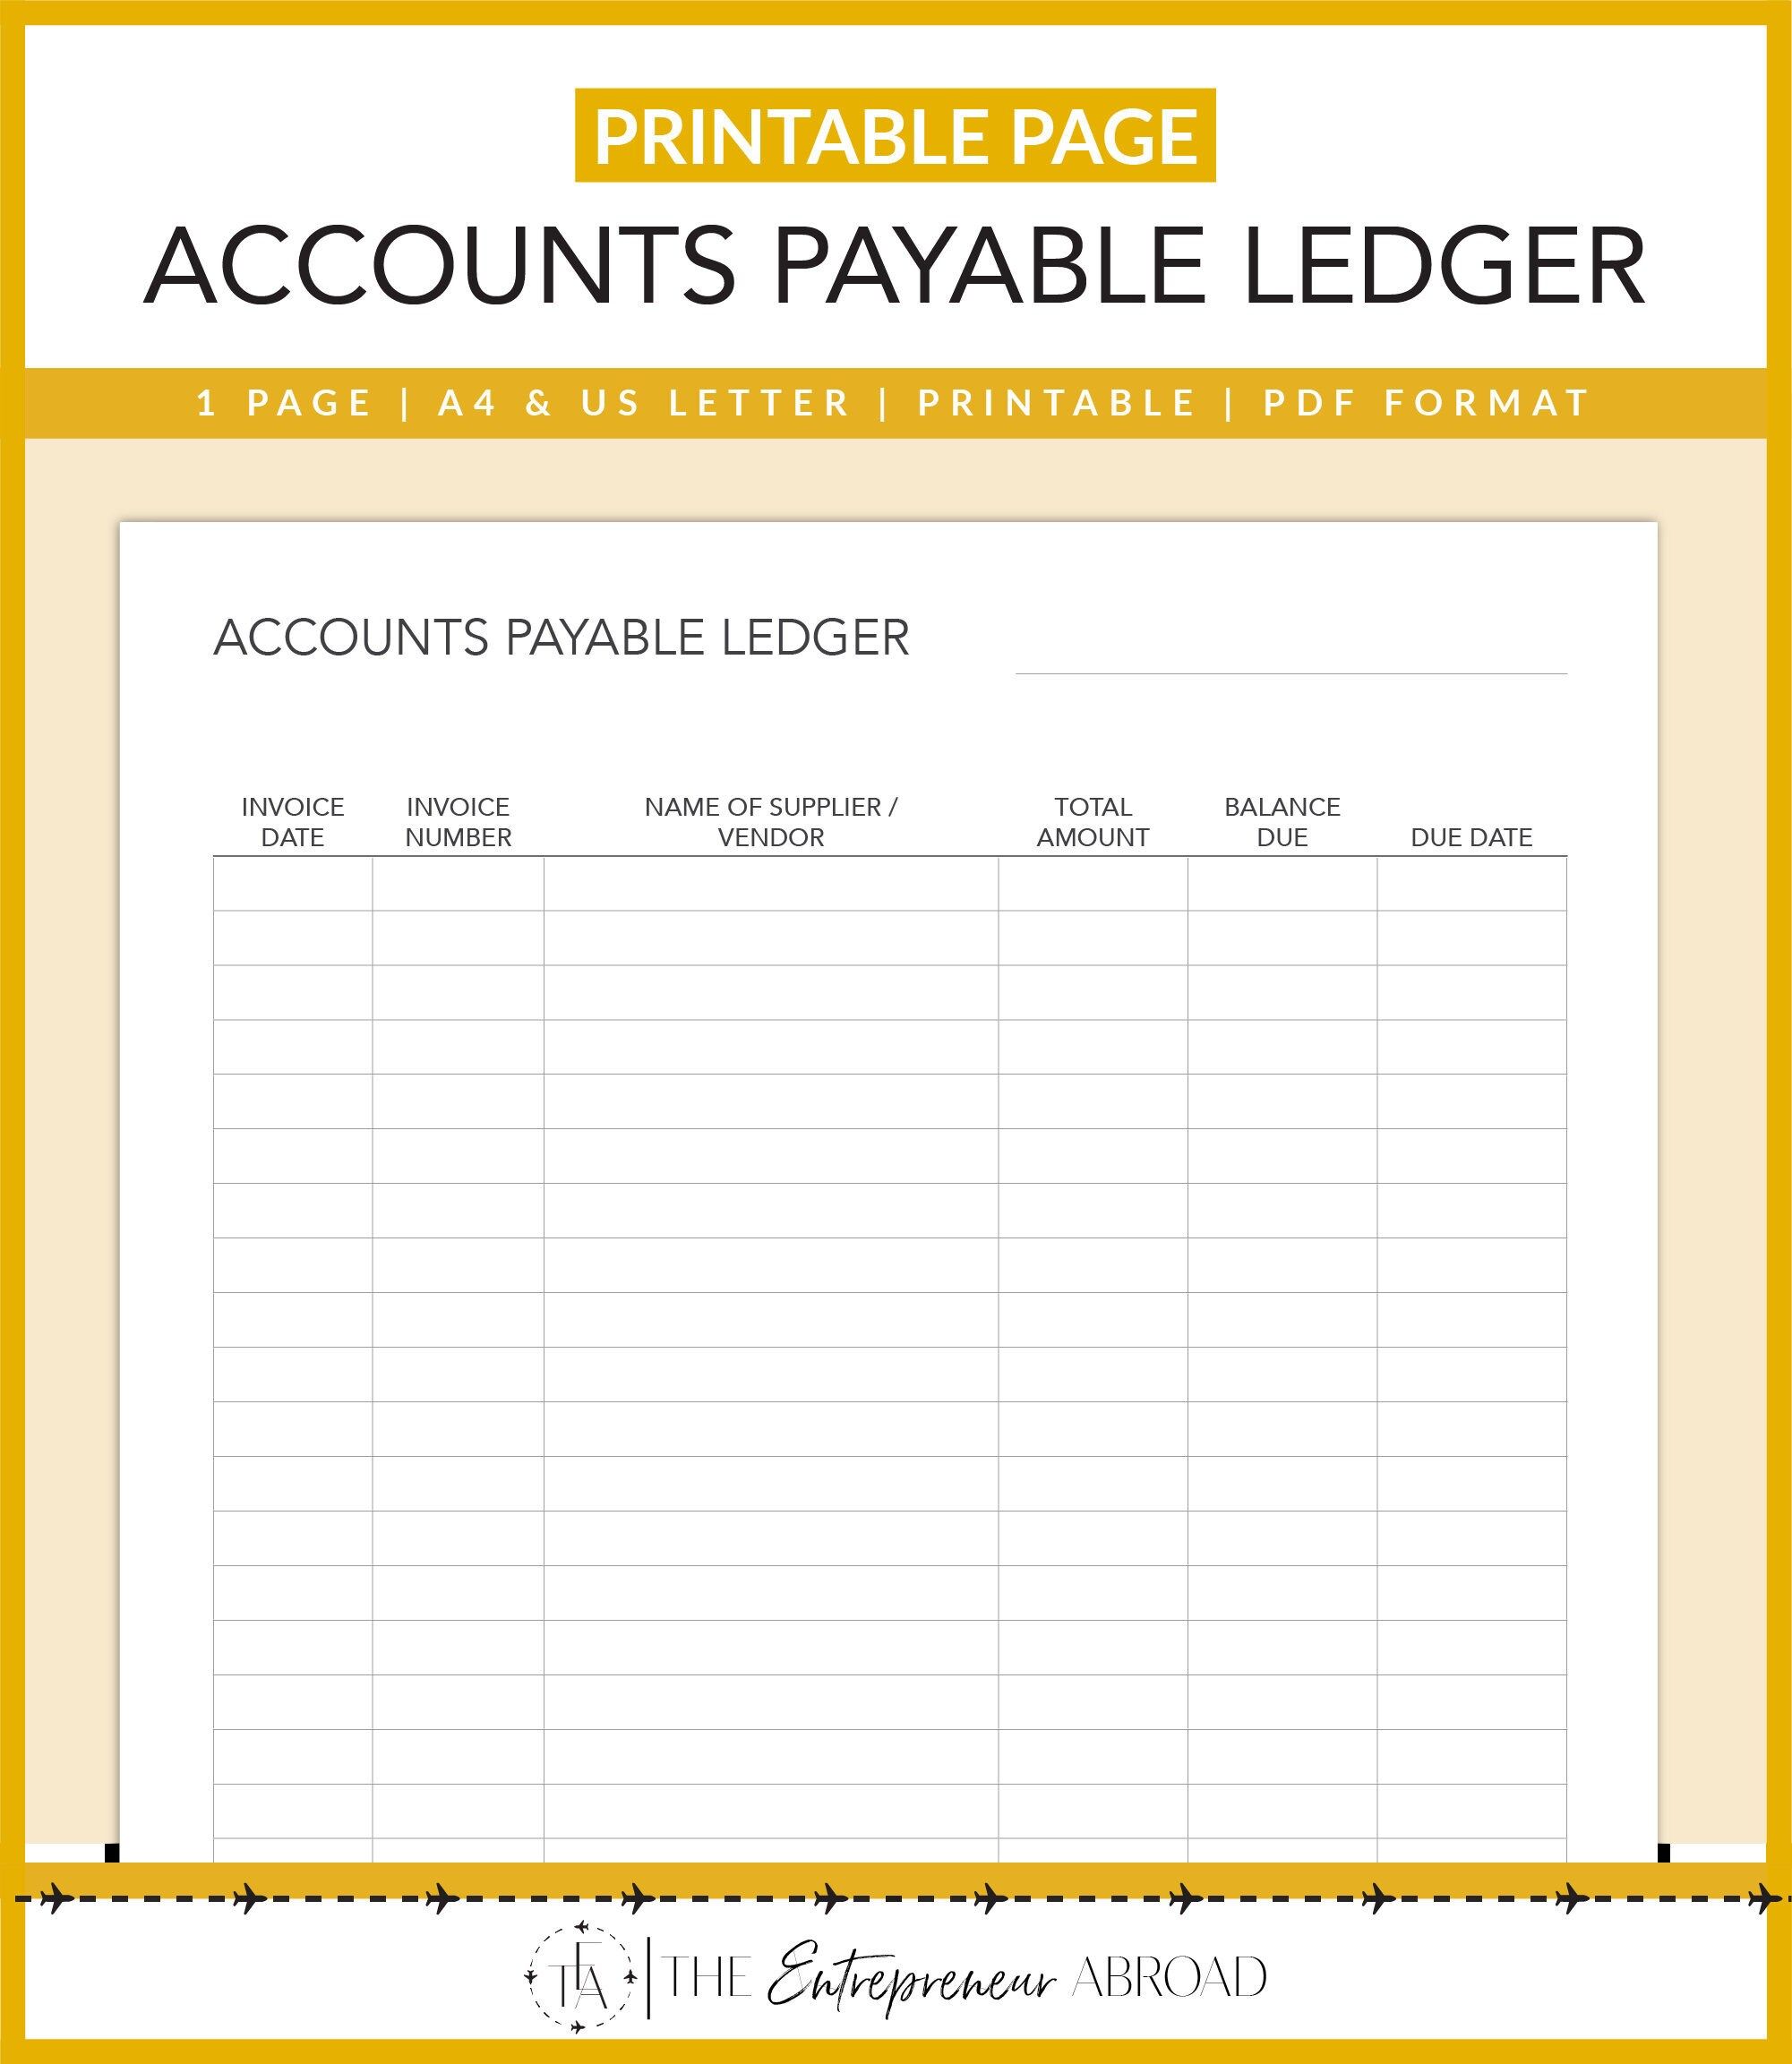 General Ledger in Accounts Payable System | Aavenir